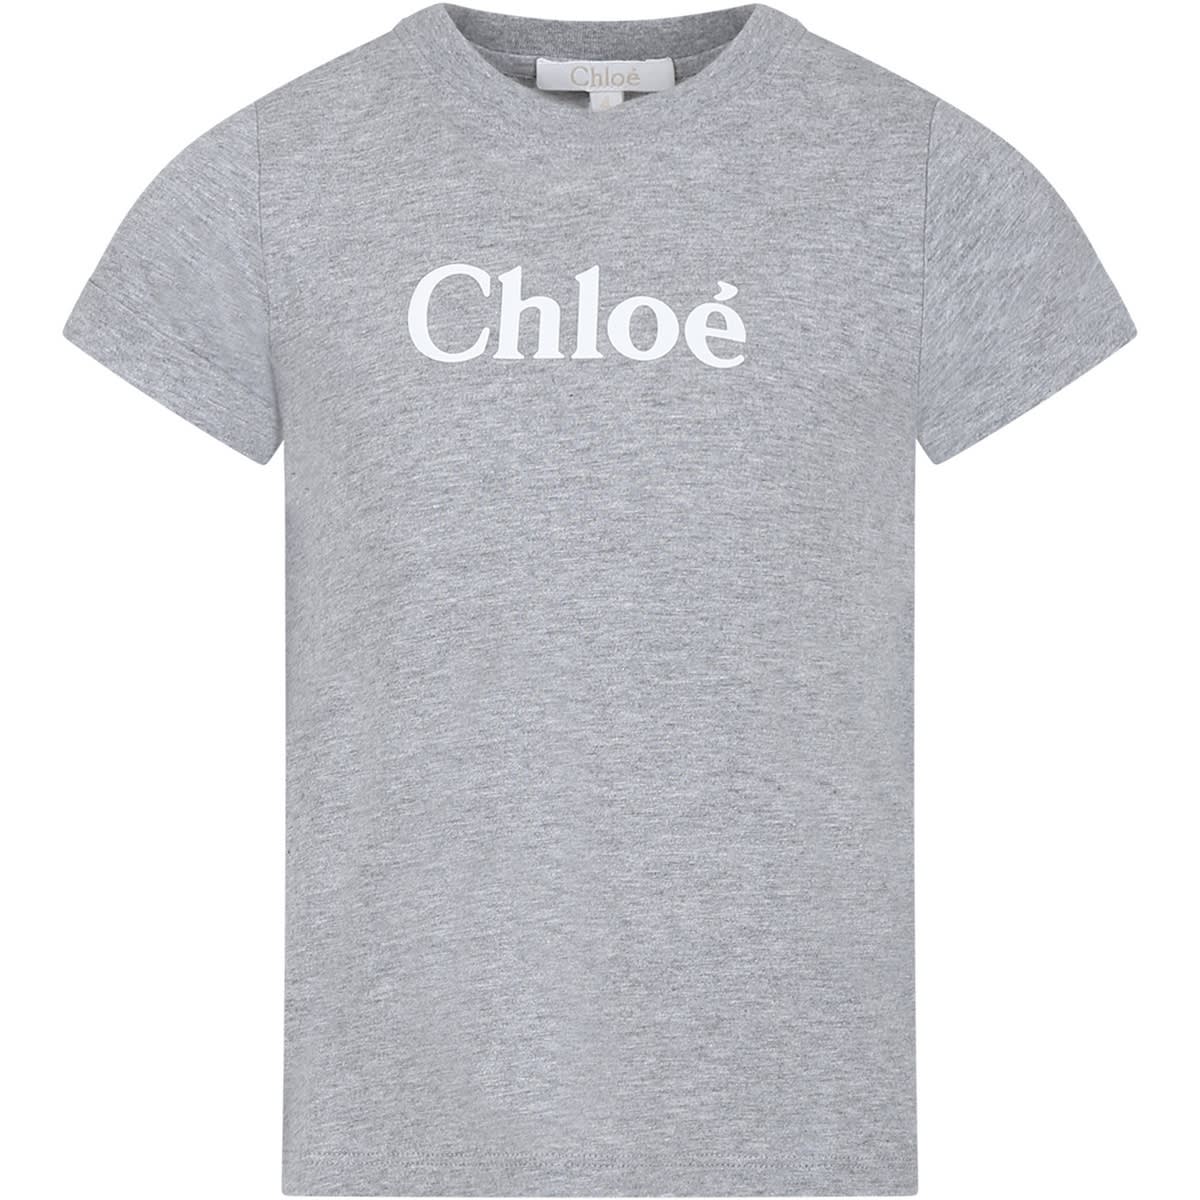 CHLOÉ GREY T-SHIRT FOR GIRL WITH LOGO